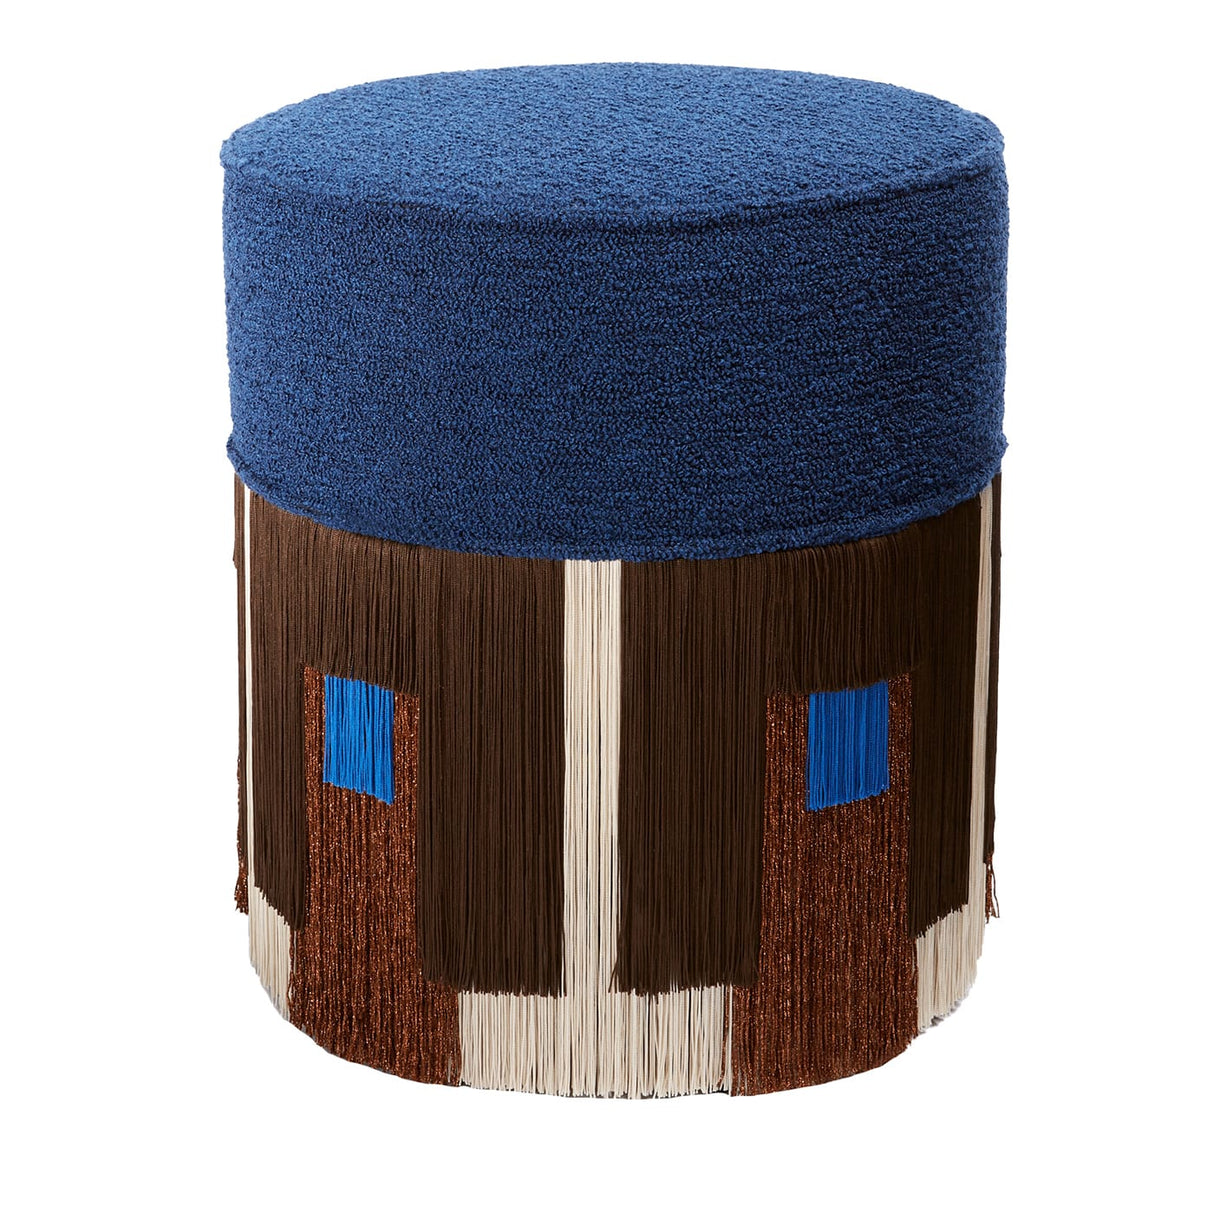 Cleo Clu Pouf A colorful accessory that will effortlessly elevate a contemporary or classic room, Cleo Clu pouf by Lorenza Bazzoli is entirely handcrafted and showcases a refined royal blue upholstered padded footrest along with a superbly designed geometric pattern floor-length fringe skirt. Each piece is numbered and signed by the artist. Customization is also available